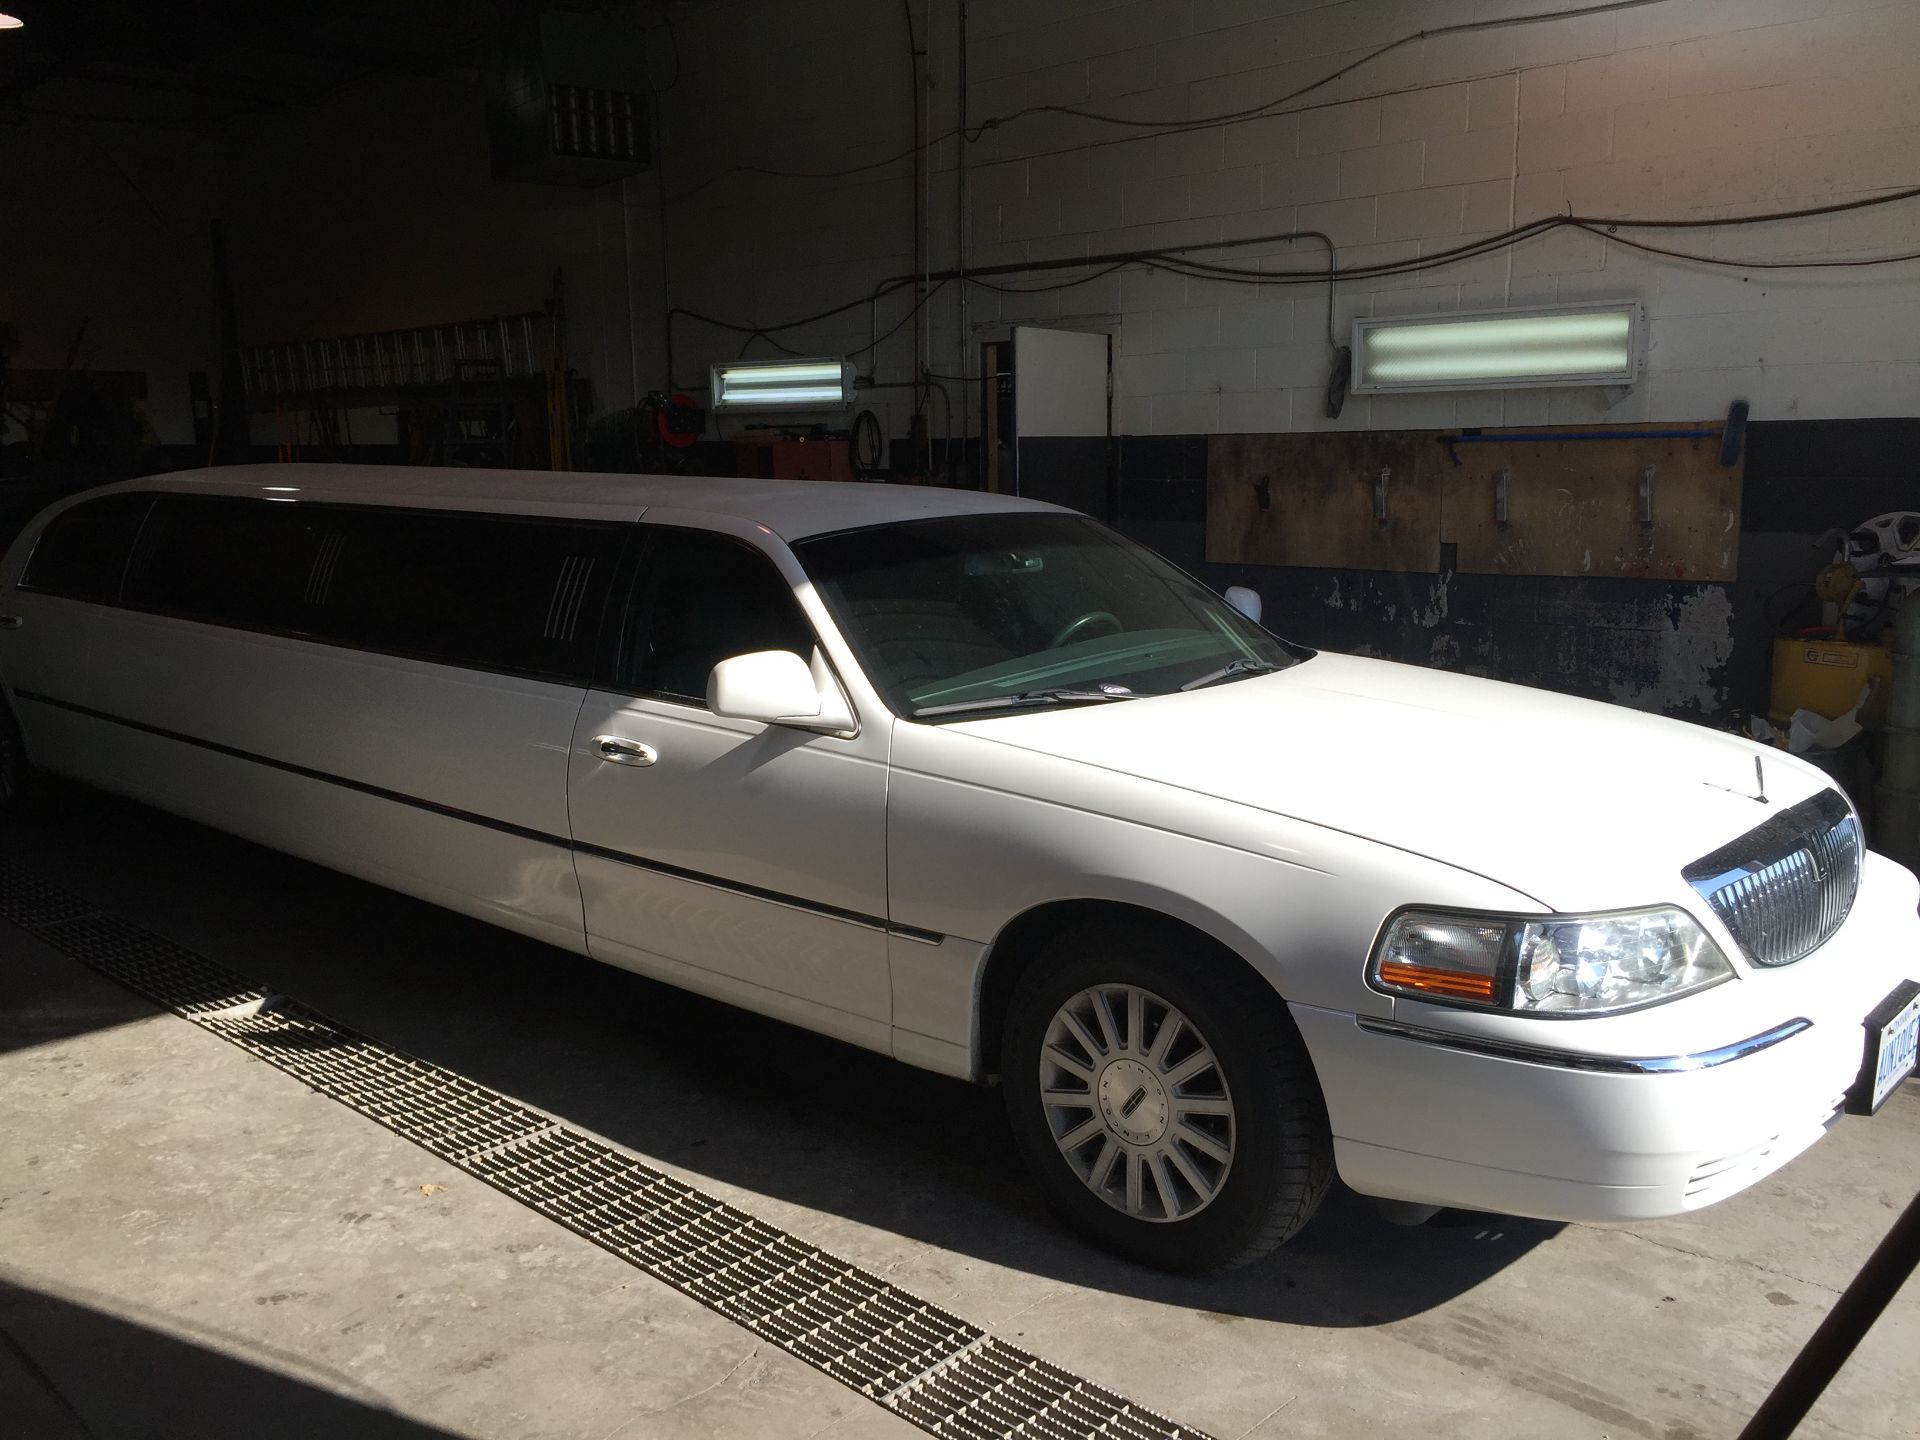 2007 Lincoln Town Car Stretch - 10 Passenger by Executive Coach - 58,600 Miles - Image 7 of 10